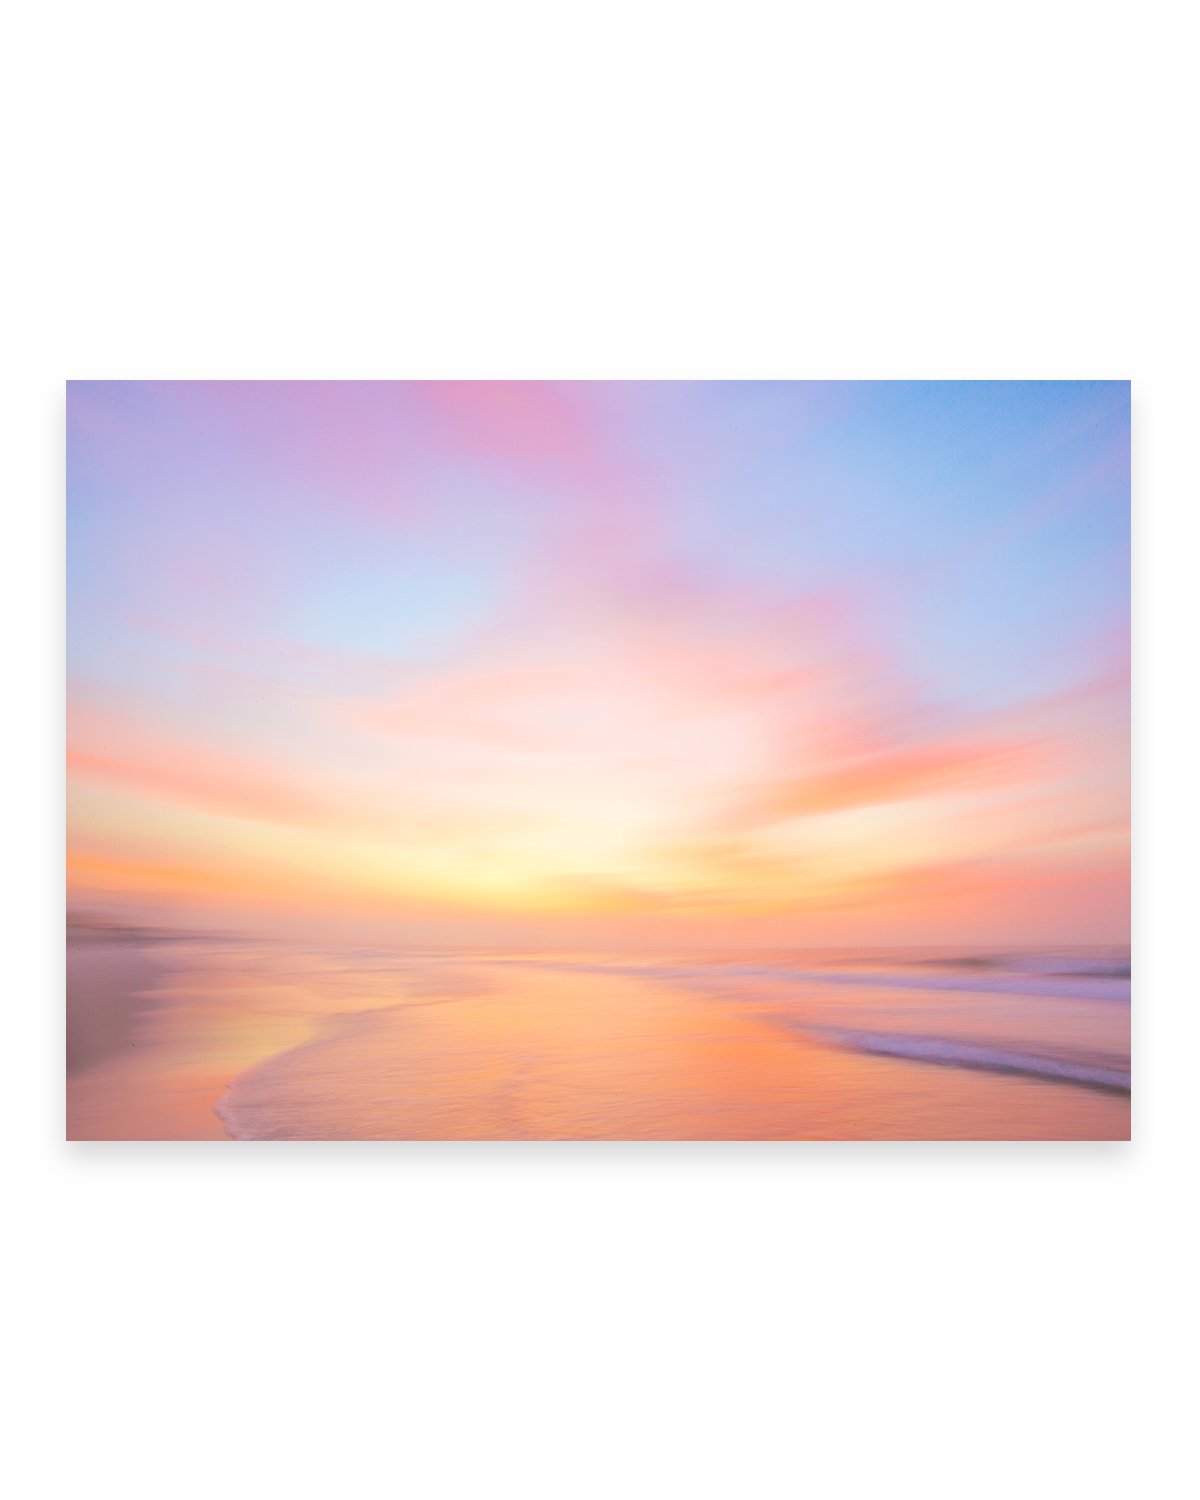 colorful abstract sunrise beach photograph by Wright and Roam